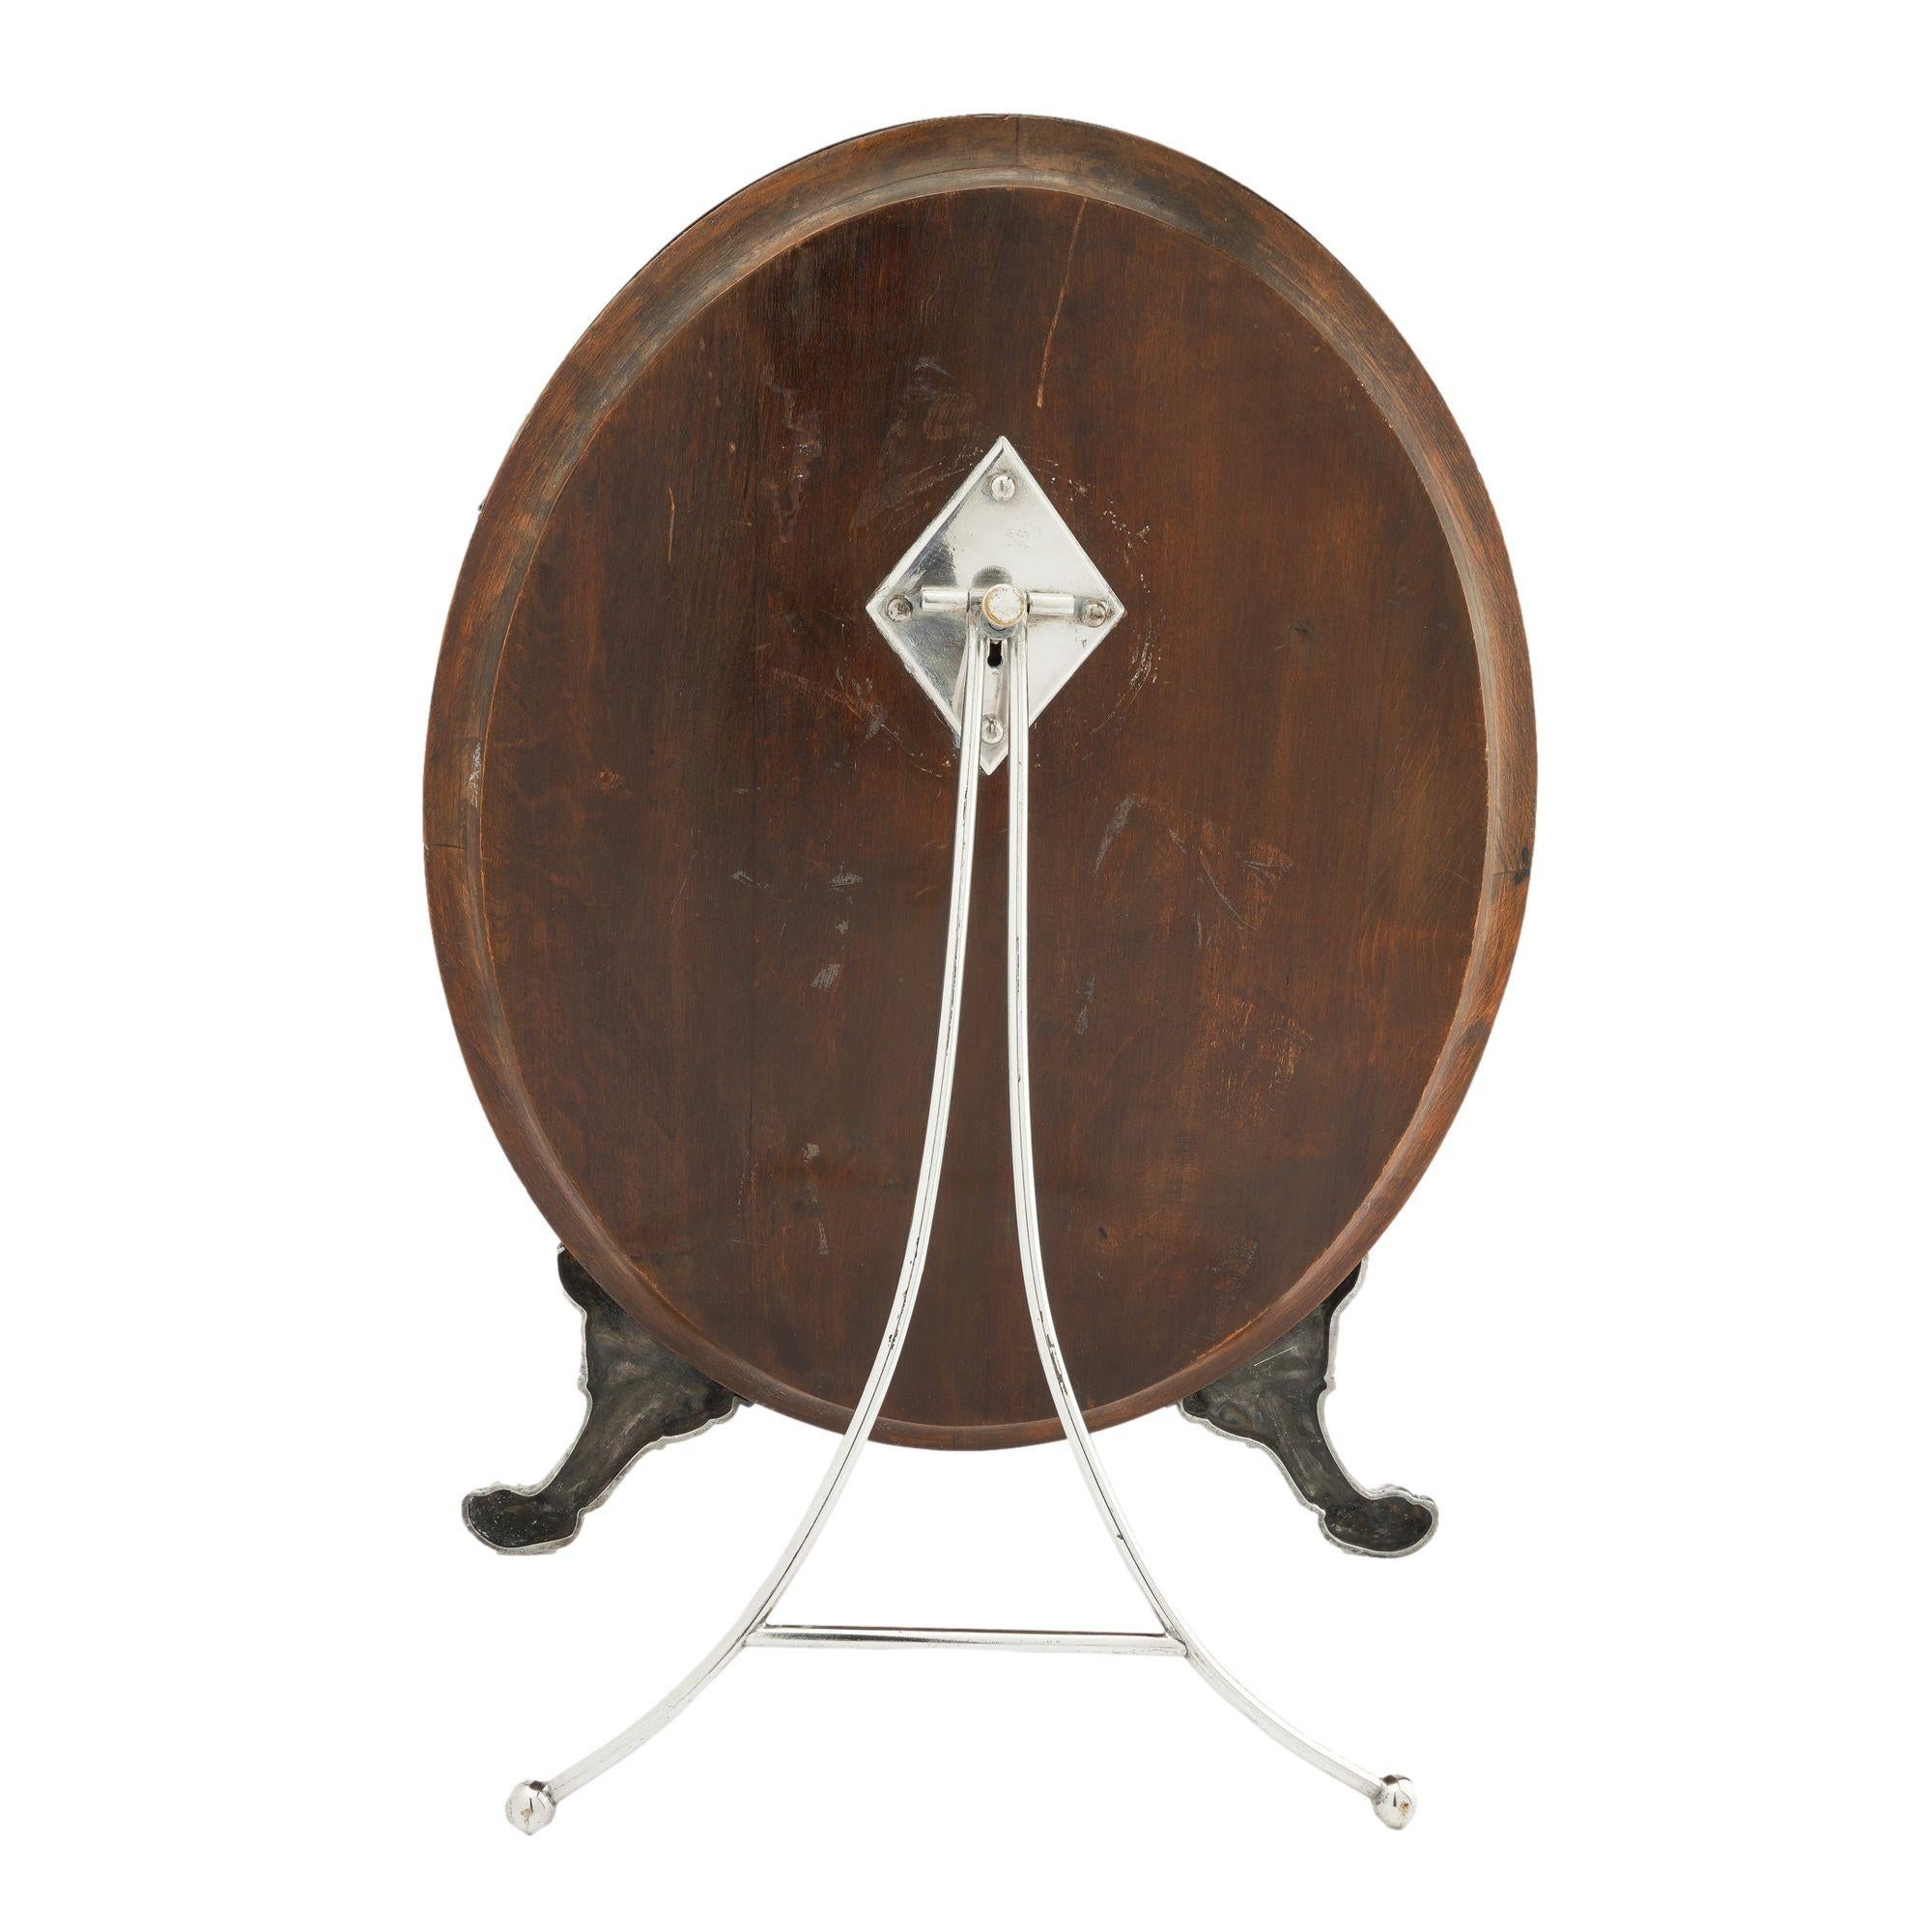 Oval easel back dressing mirror attributed to the Norblin Metal Works, 1880-1900 1